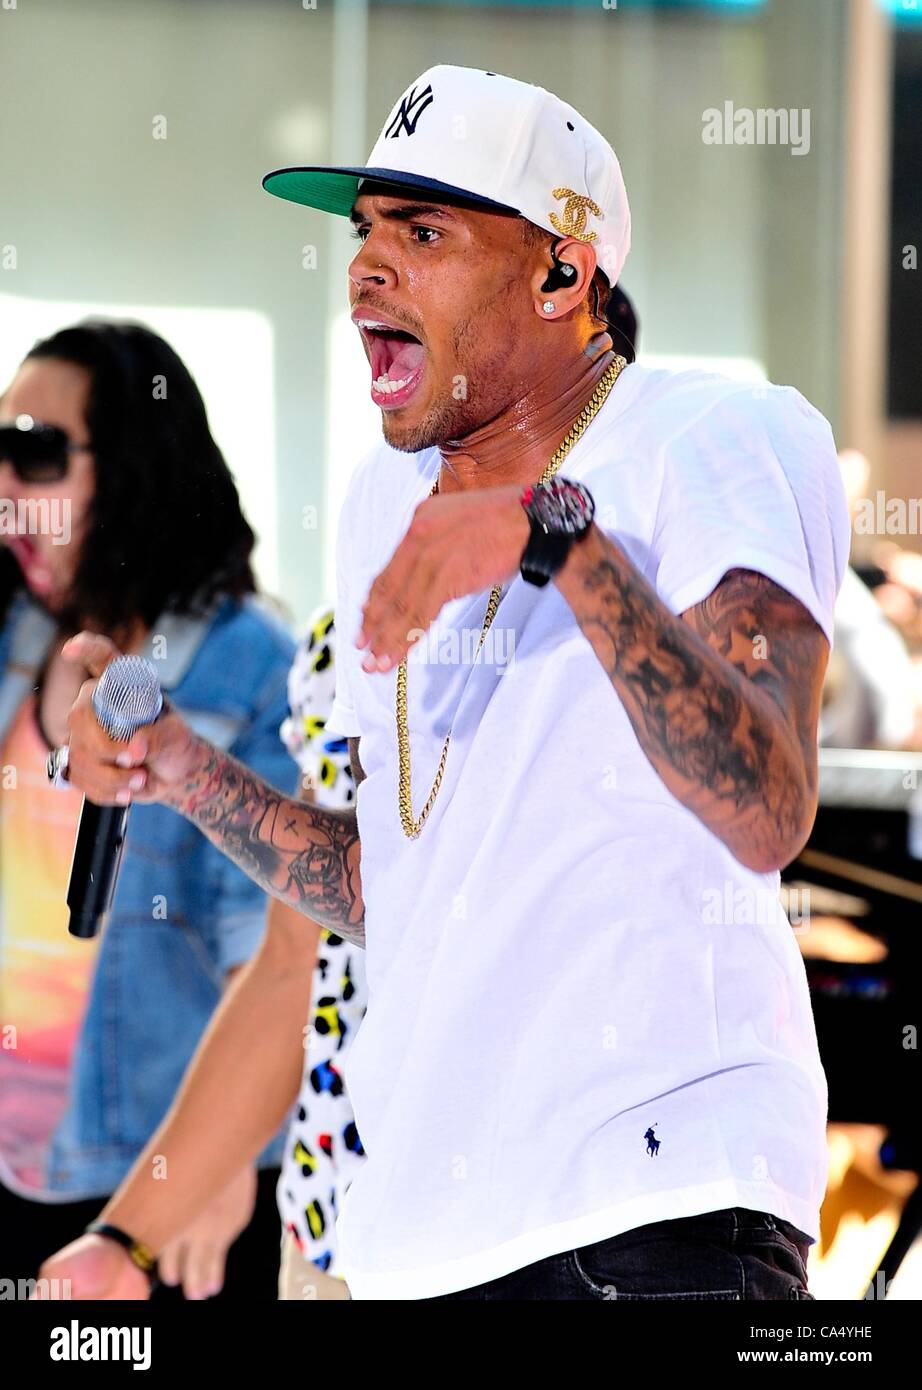 Chris Brown on stage for NBC Today Show Summer Concert Series with Chris Brown, Rockefeller Plaza, New York, NY June 8, 2012. Photo By: Gregorio T. Binuya/Everett Collection Stock Photo